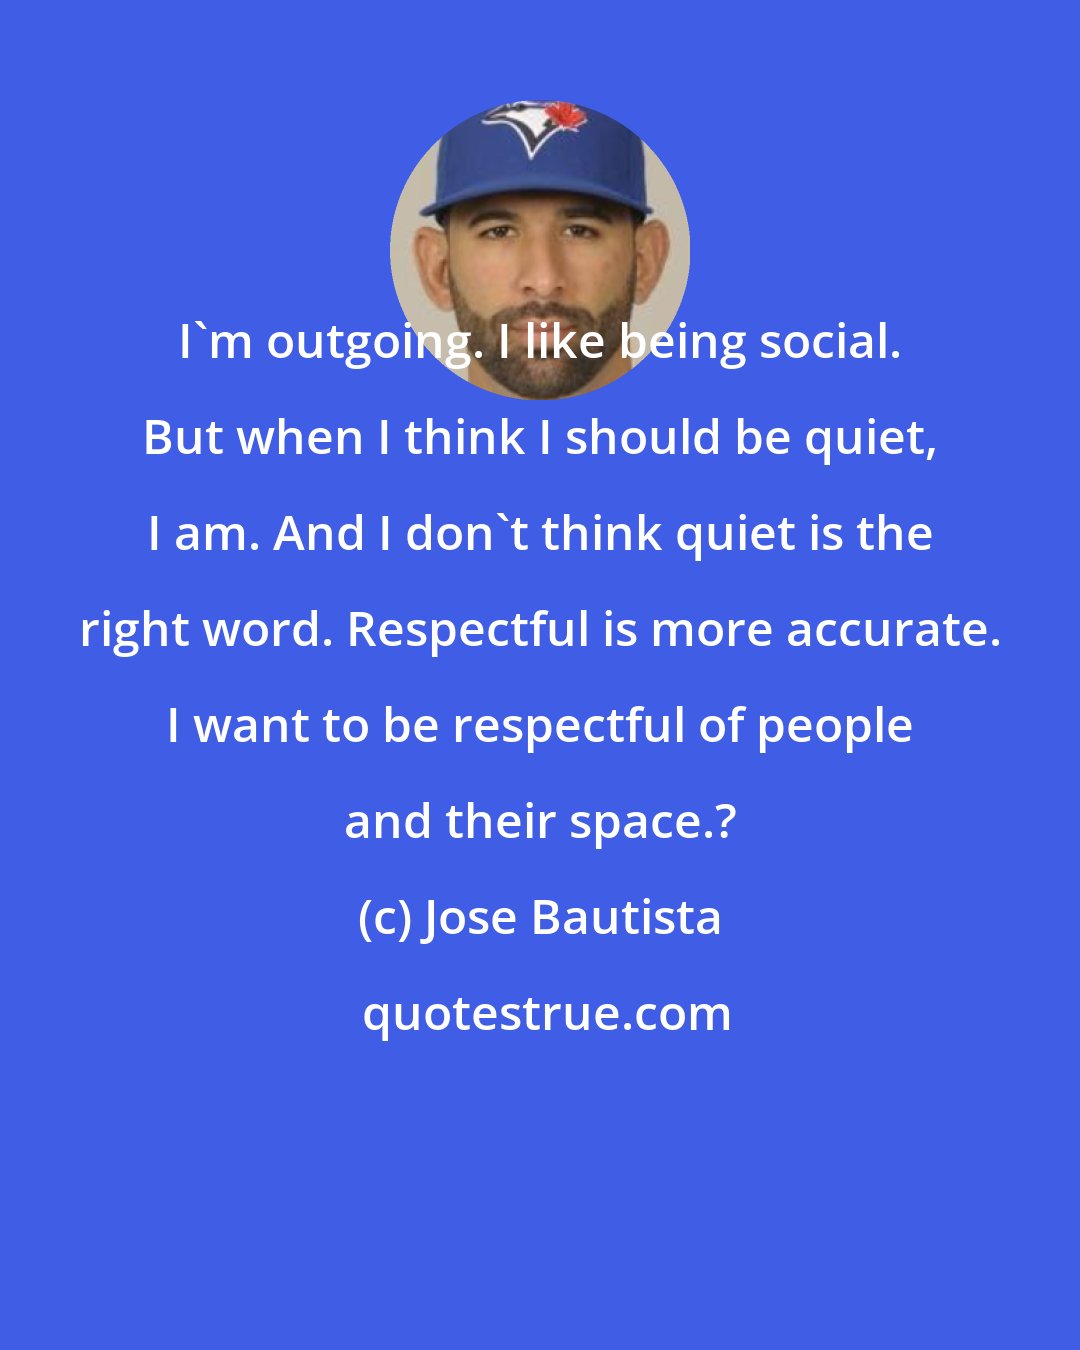 Jose Bautista: I'm outgoing. I like being social. But when I think I should be quiet, I am. And I don't think quiet is the right word. Respectful is more accurate. I want to be respectful of people and their space.?